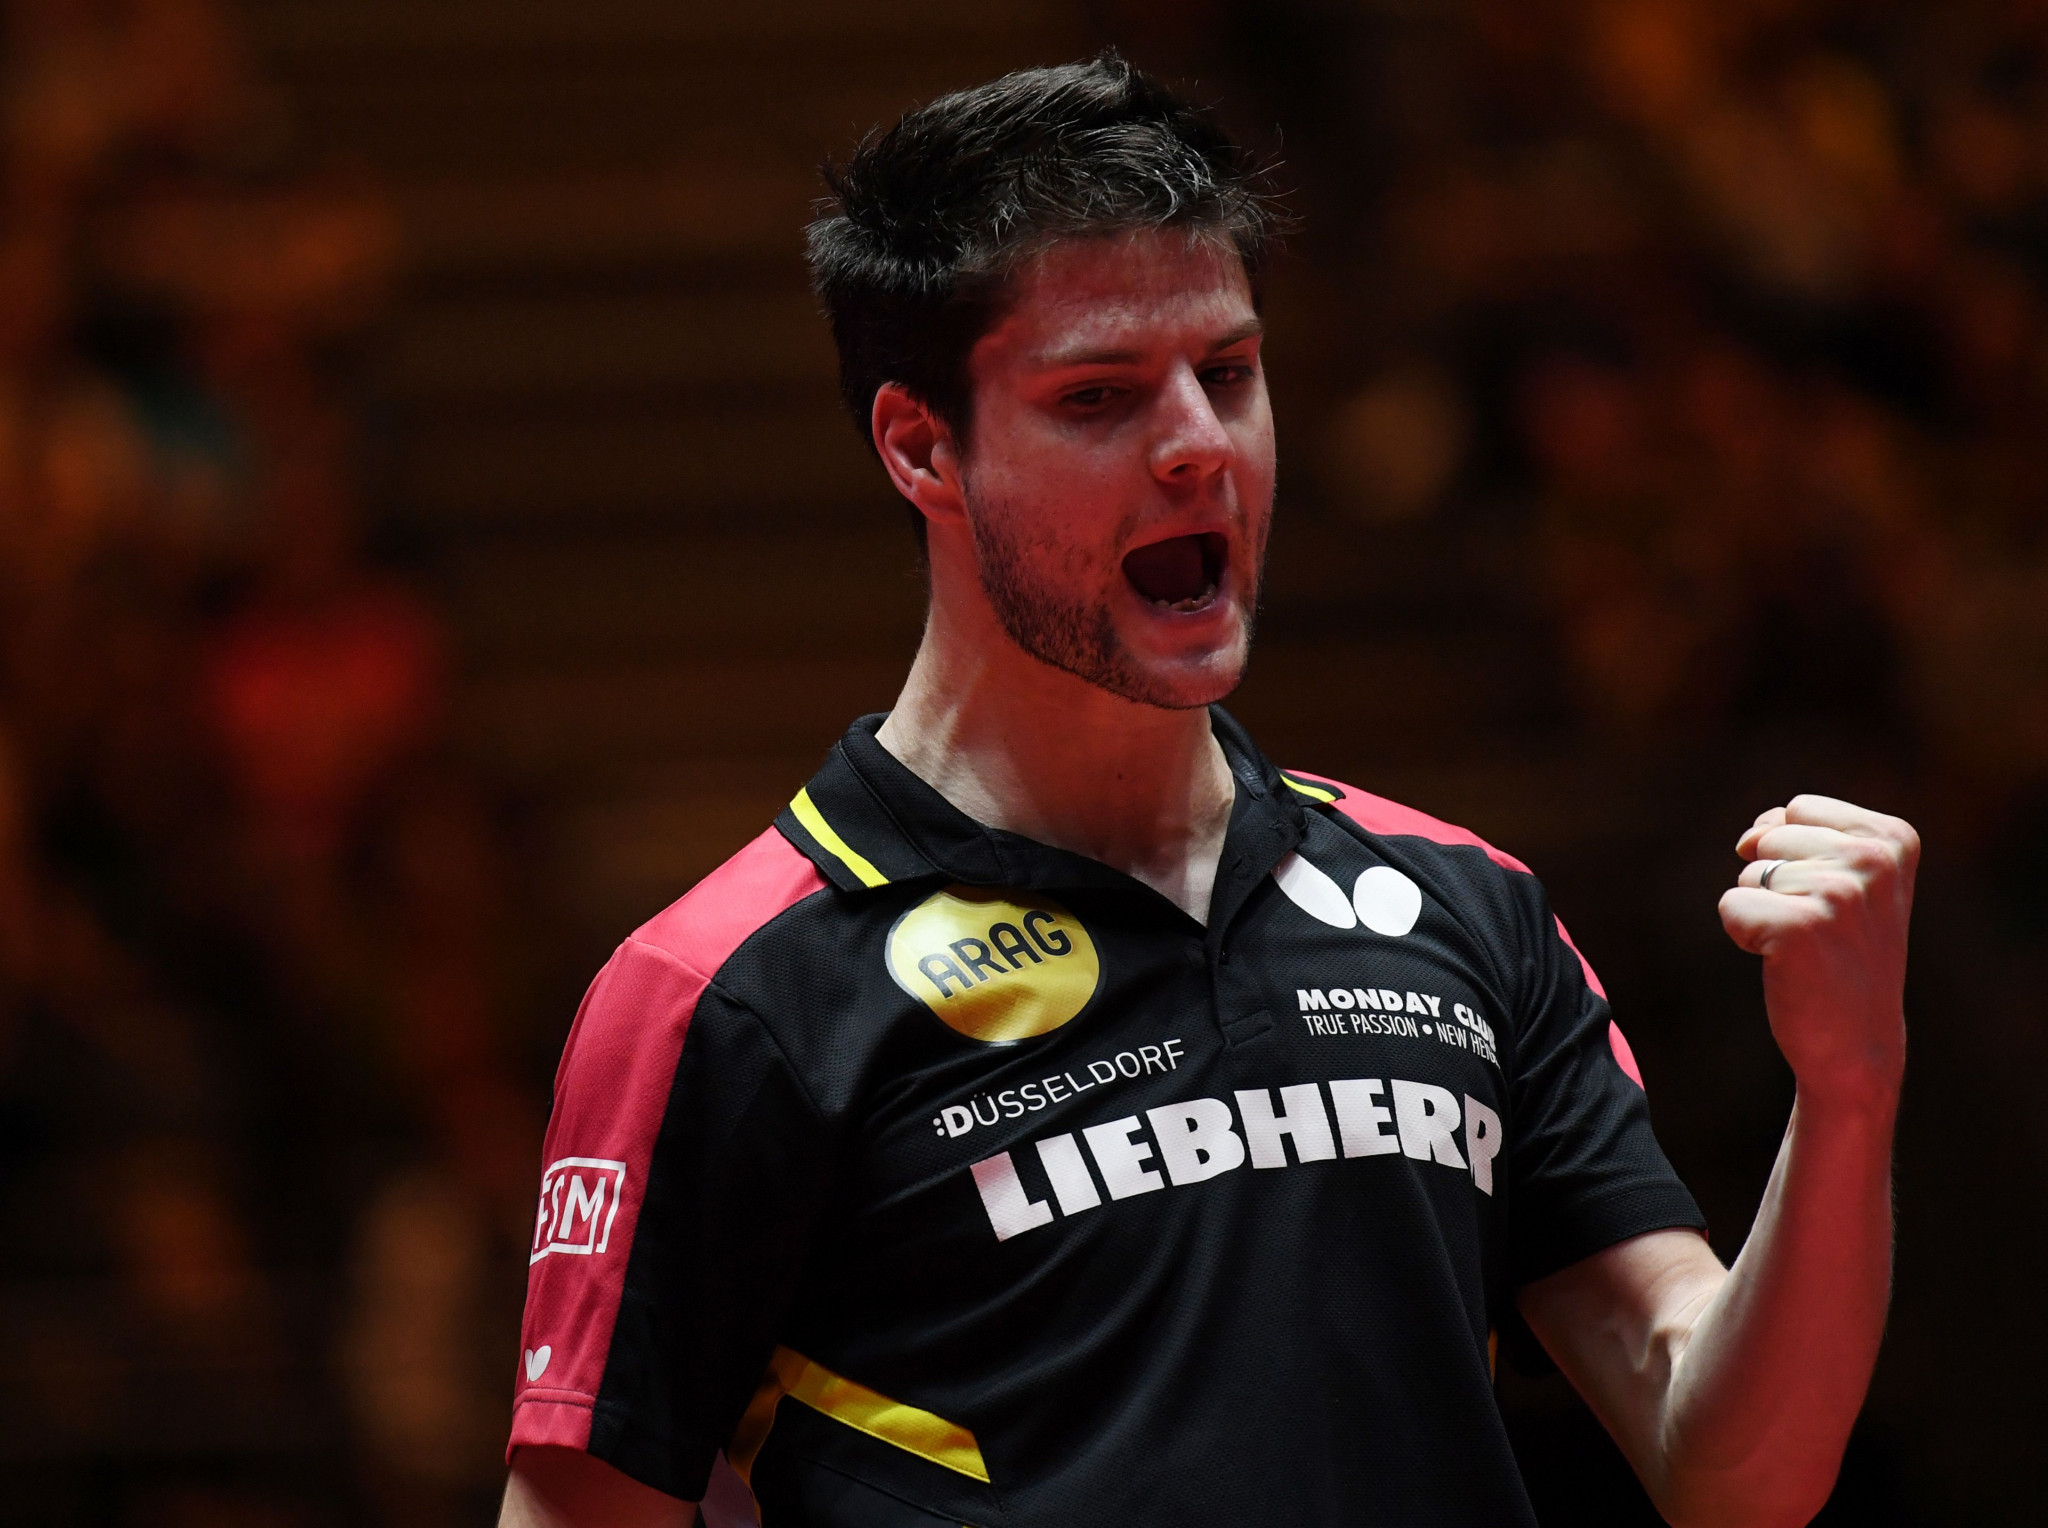 Ovtcharov edges Boll again to clinch third ITTF German Open title